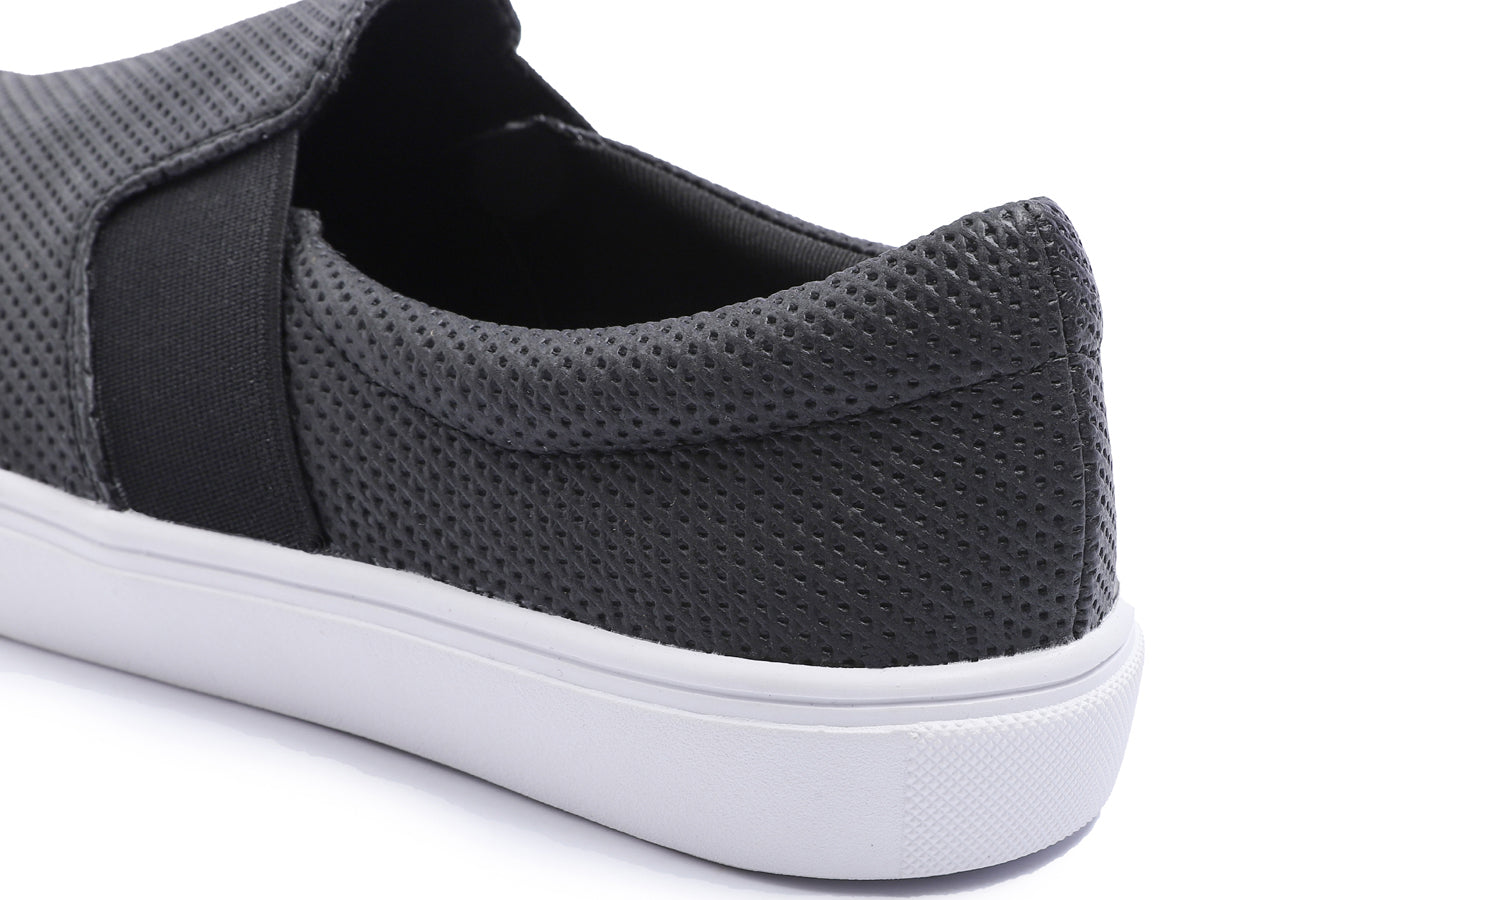 Feversole Women's Casual Slip On Sneaker Comfort Cupsole Loafer Flats Black Perforated Elastic